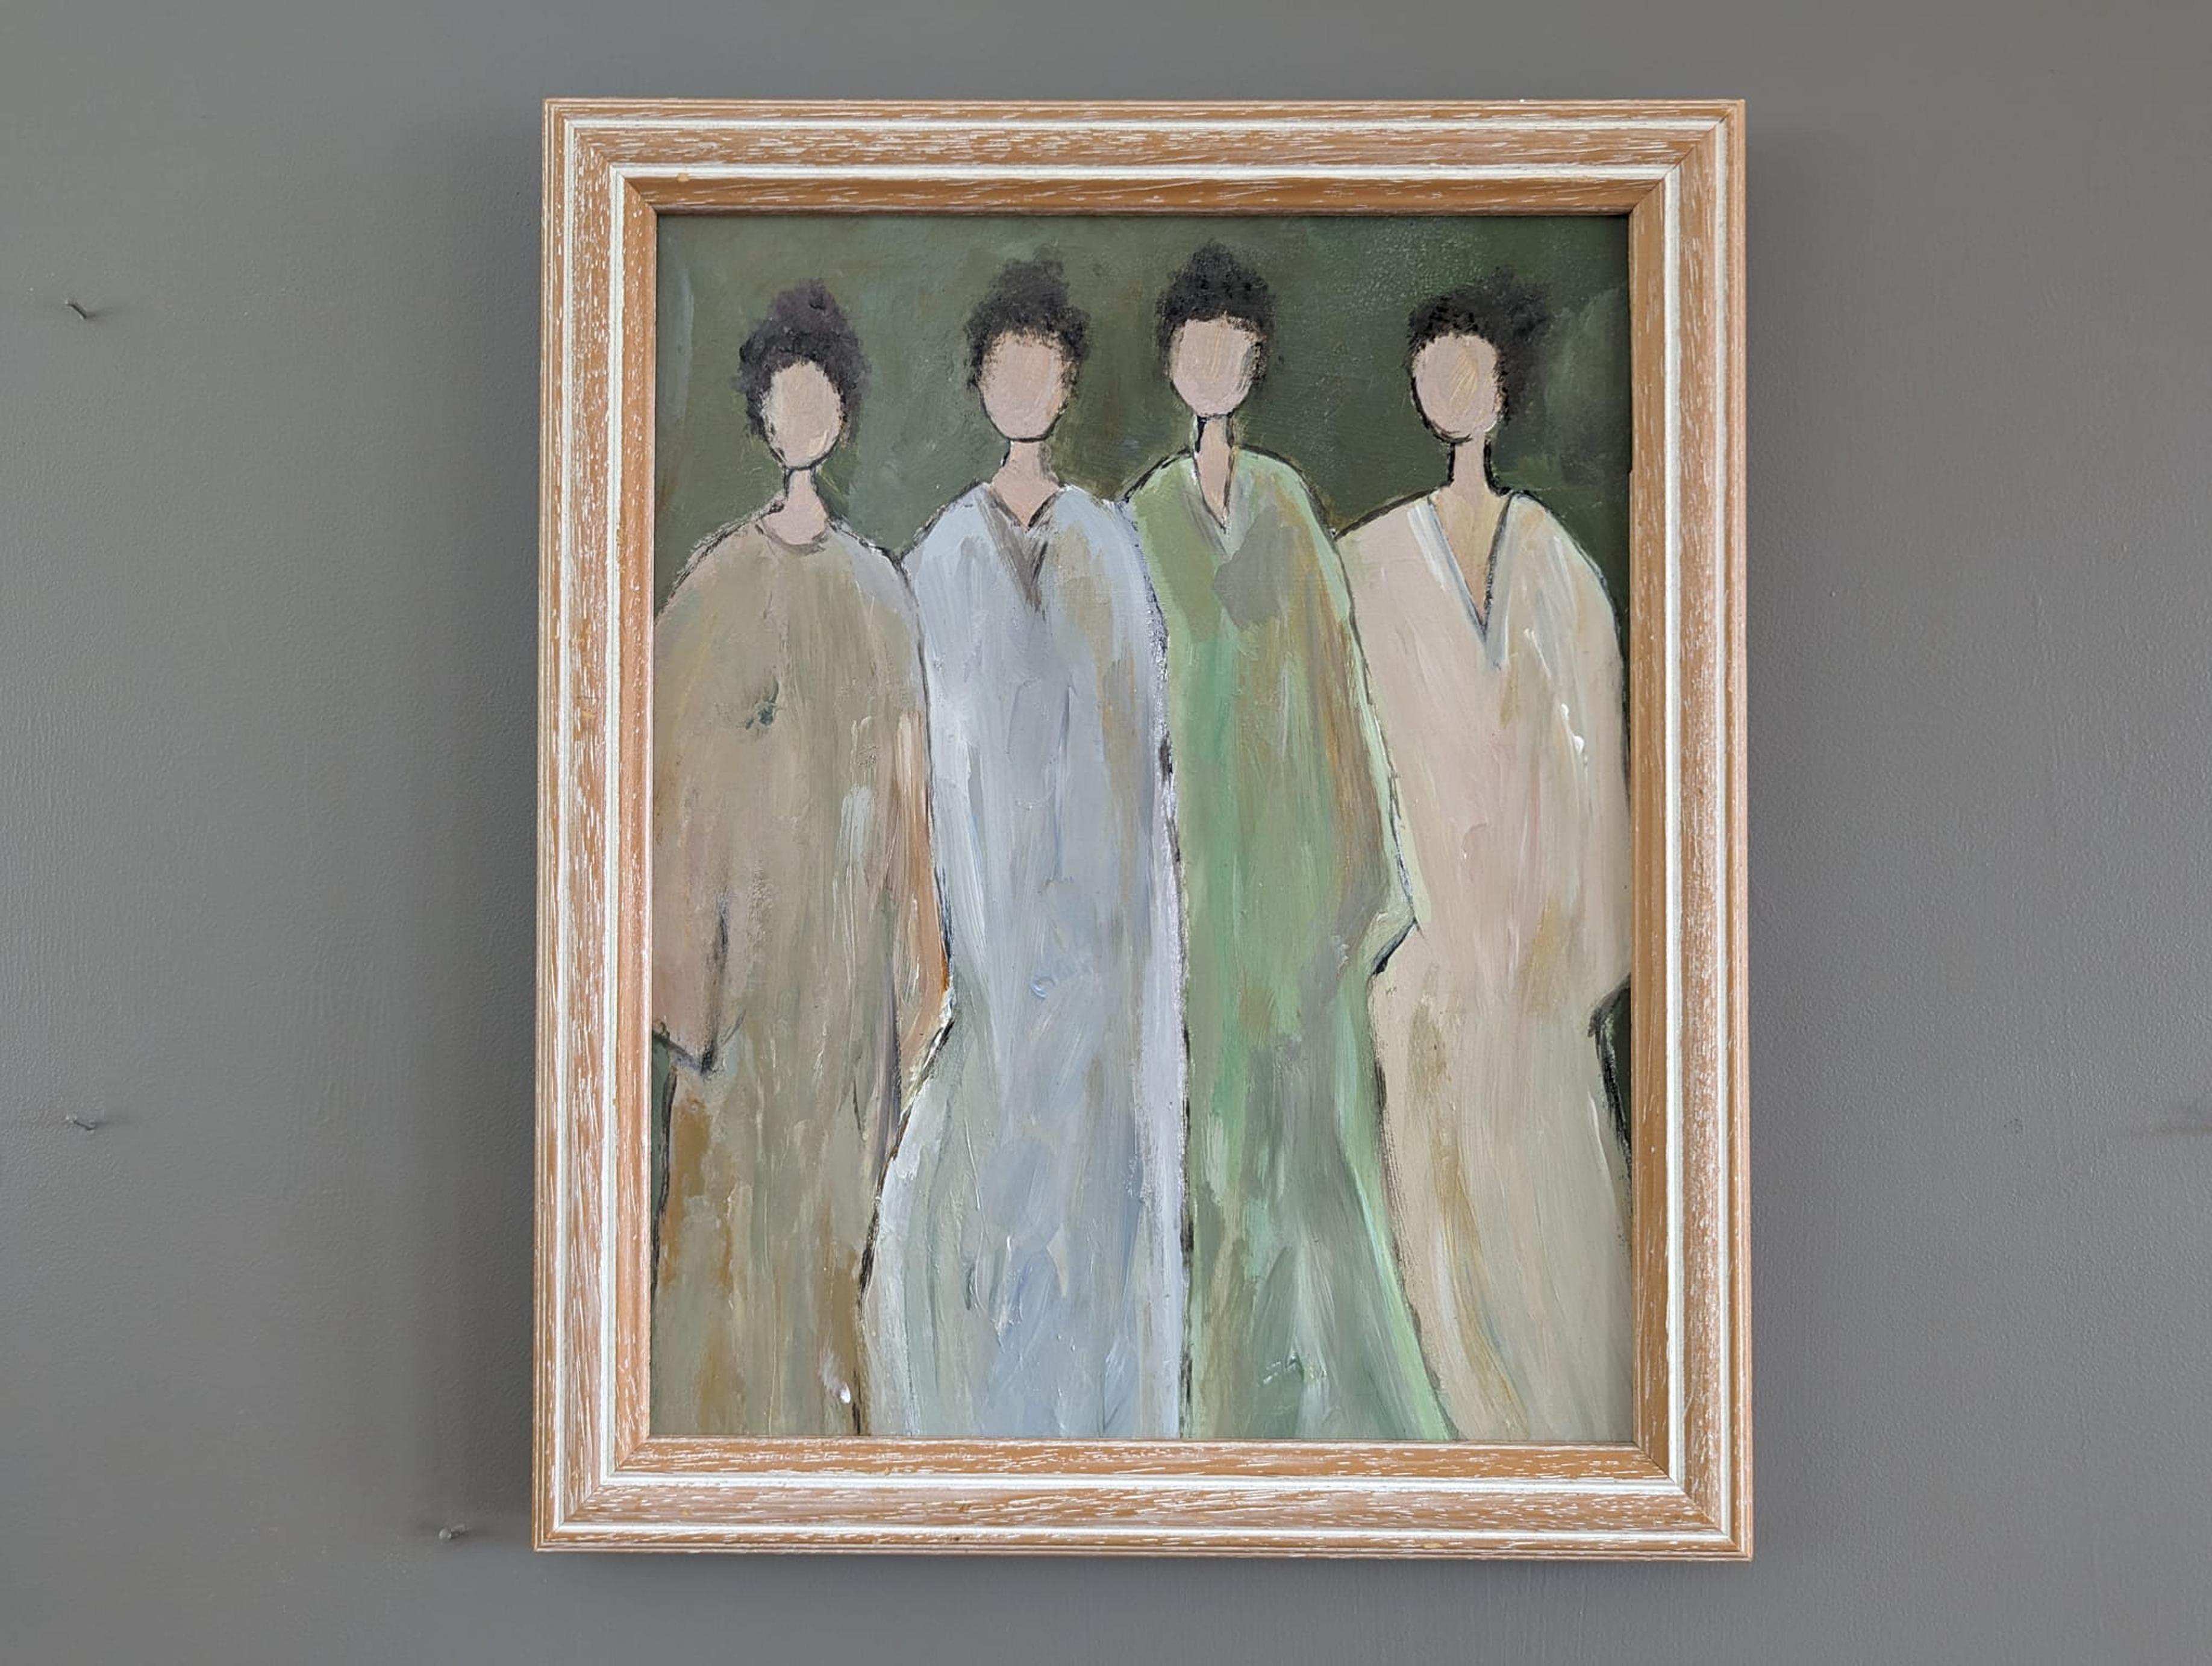 ALIGN
Size: 34.5 x 28 cm (including frame)
Oil on Board

A gentle and elegant modernist-style figurative portrait, executed in oil onto board.

The composition is centered around four female figures standing side by side, each adorned in long